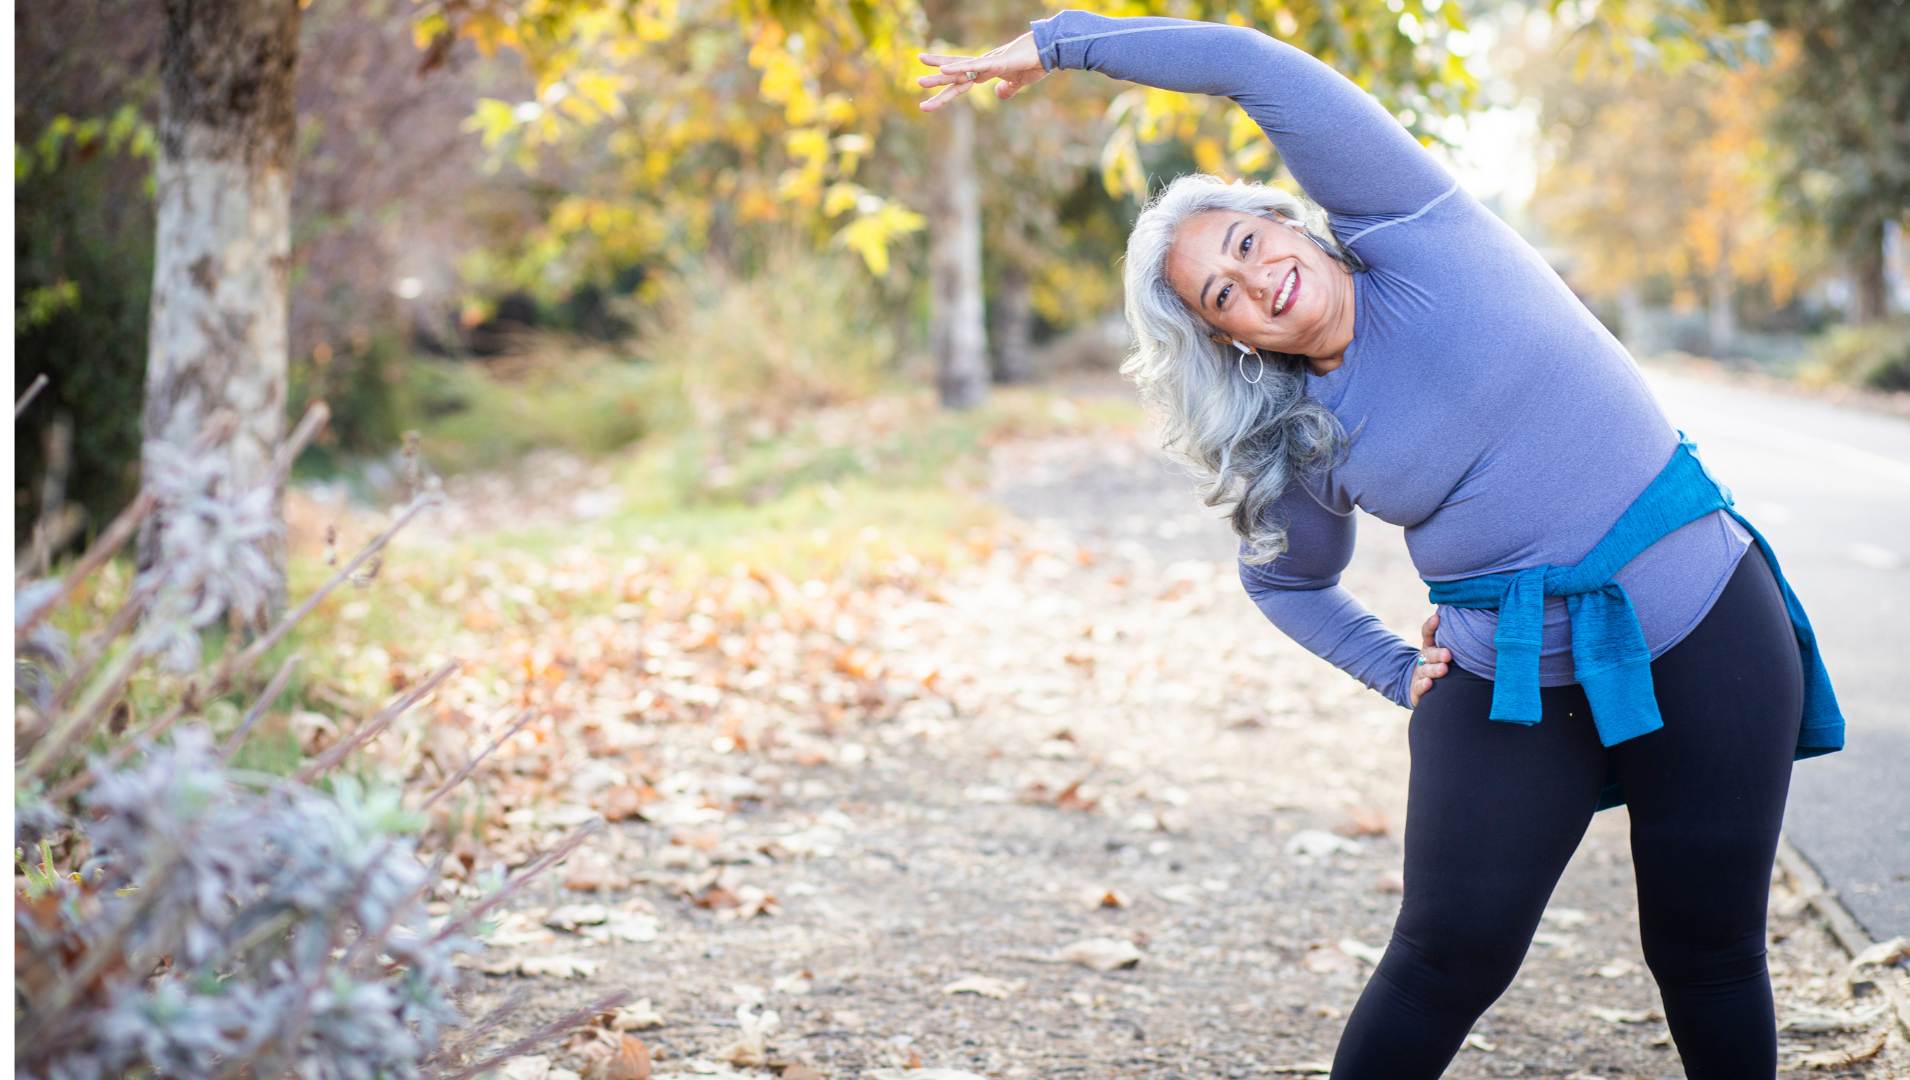 Woman stretching in fitness gear to support back health